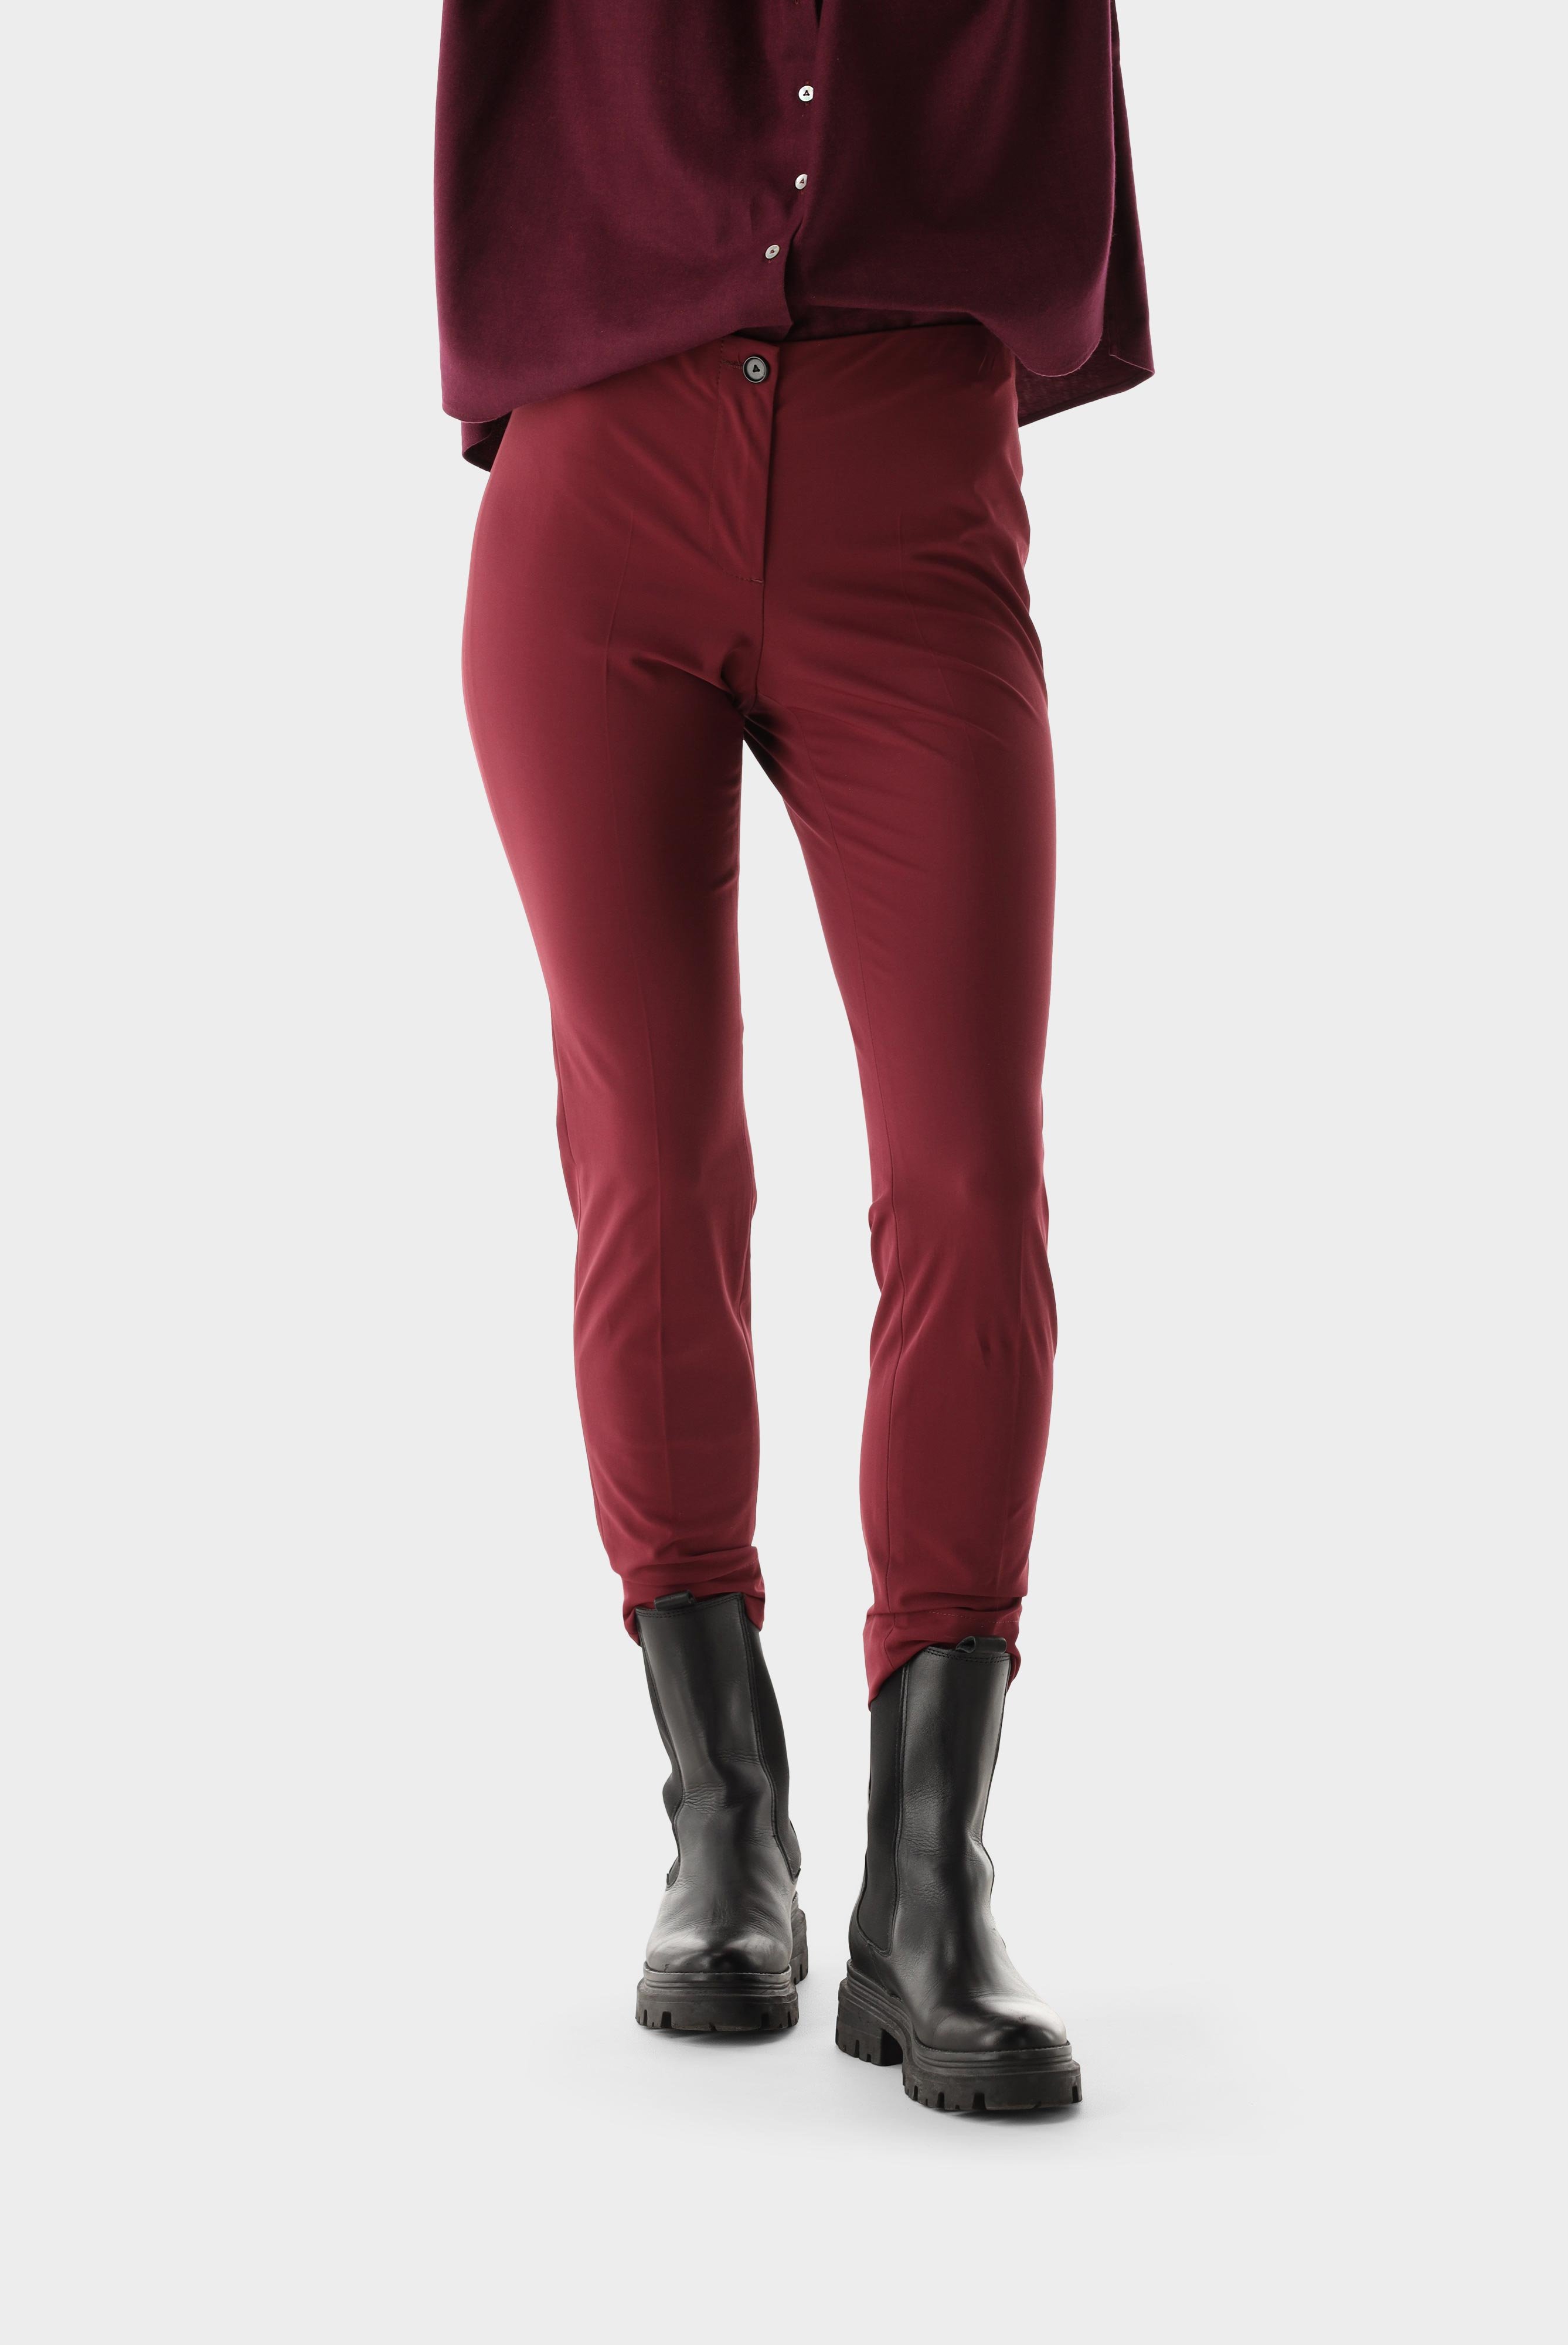 Jeans & Trousers+Trousers with Straiht Leg Slim Fit+04.635K..J00144.580.34